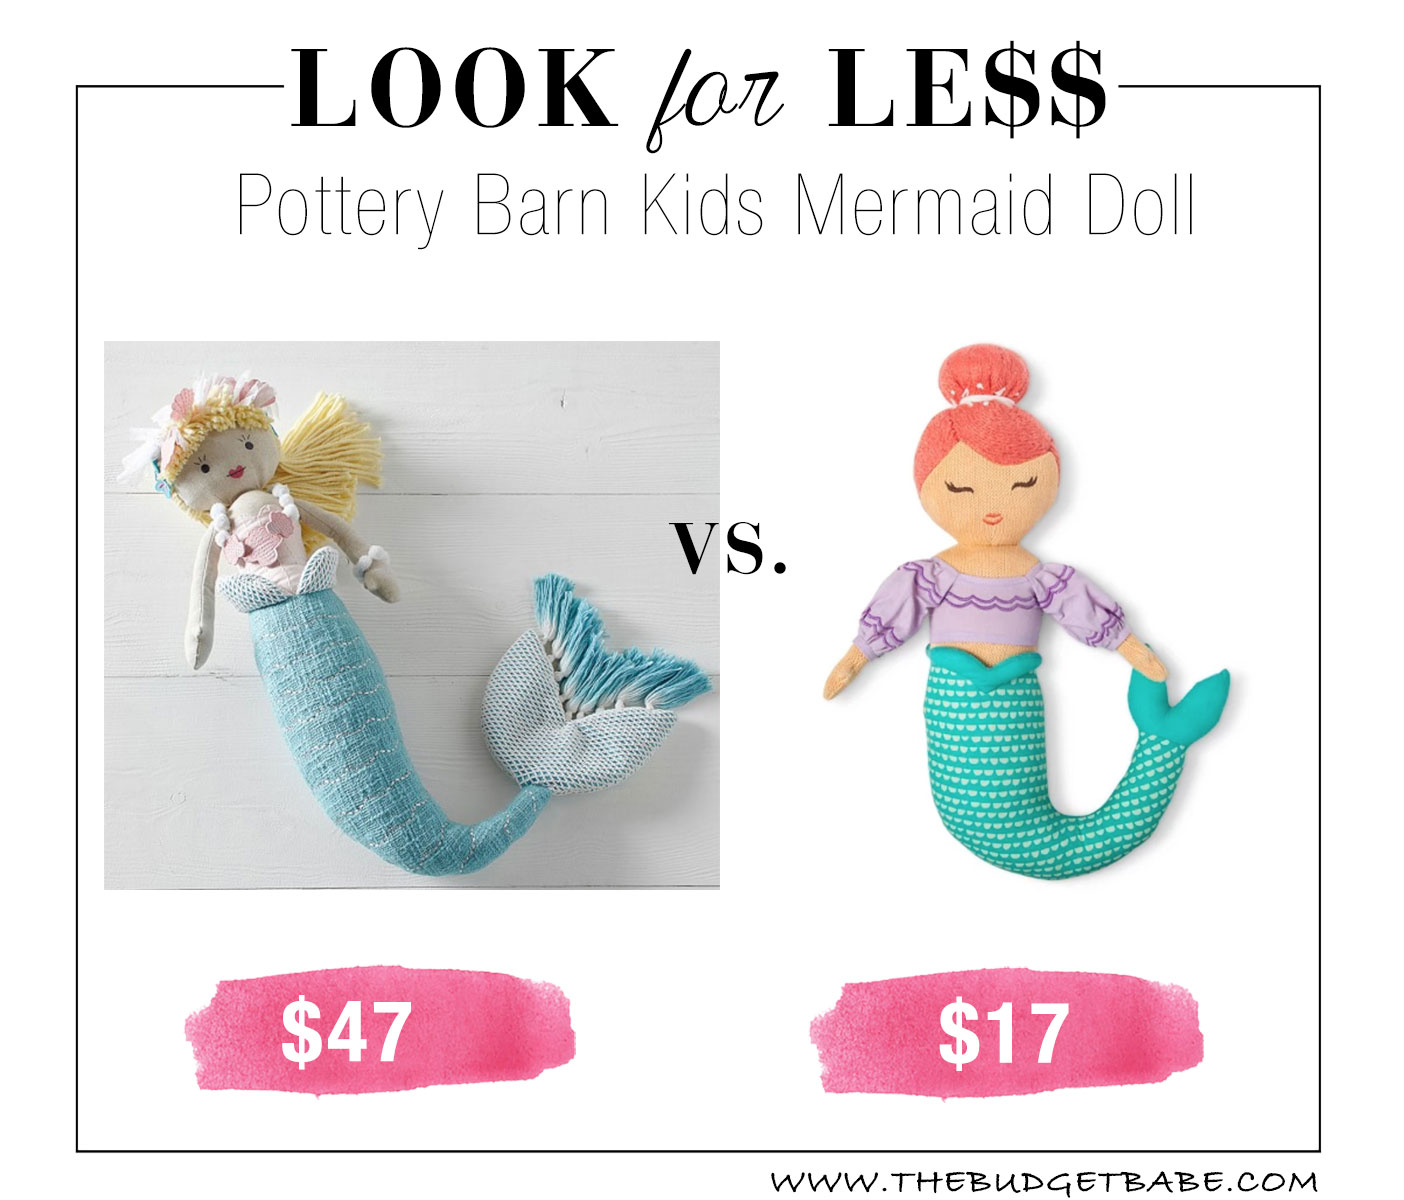 Target has that Pottery Barn Kids look for less!